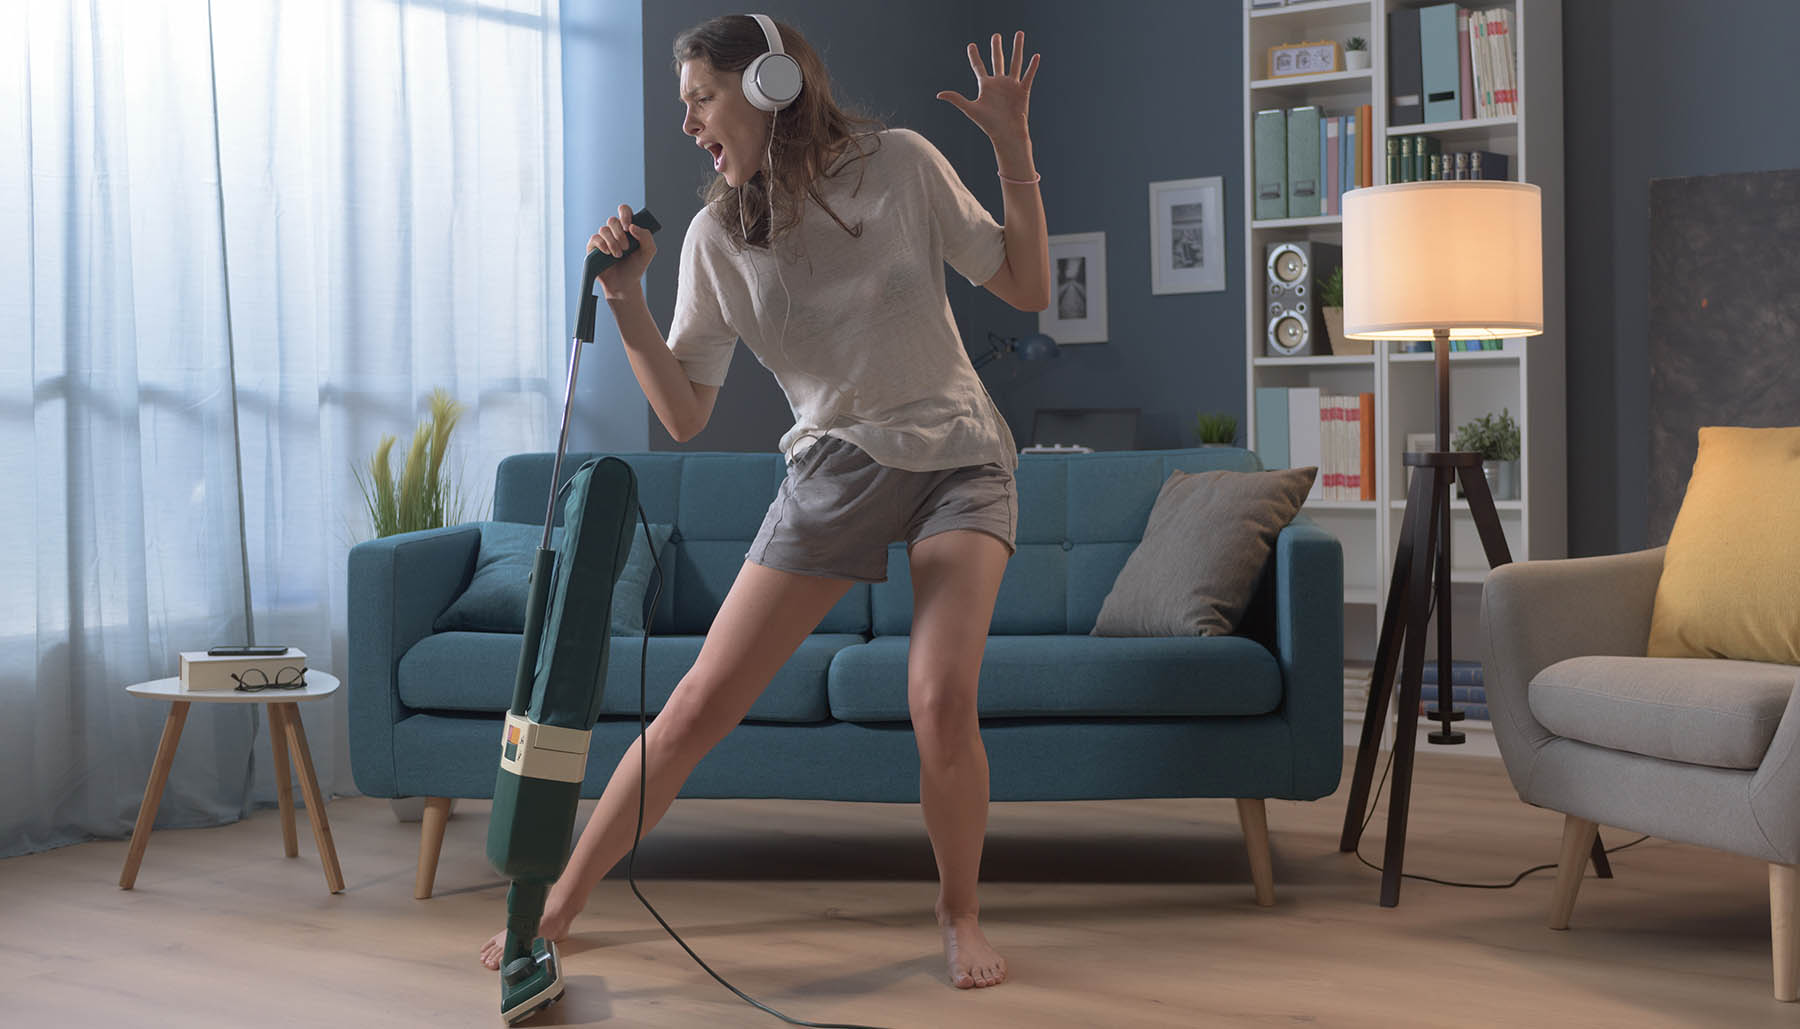 Cheerful woman cleaning up her home and singing, she is using the vacuum cleaner as a microphoneCheerful woman cleaning up her home and singing, she is using the vacuum cleaner as a microphone